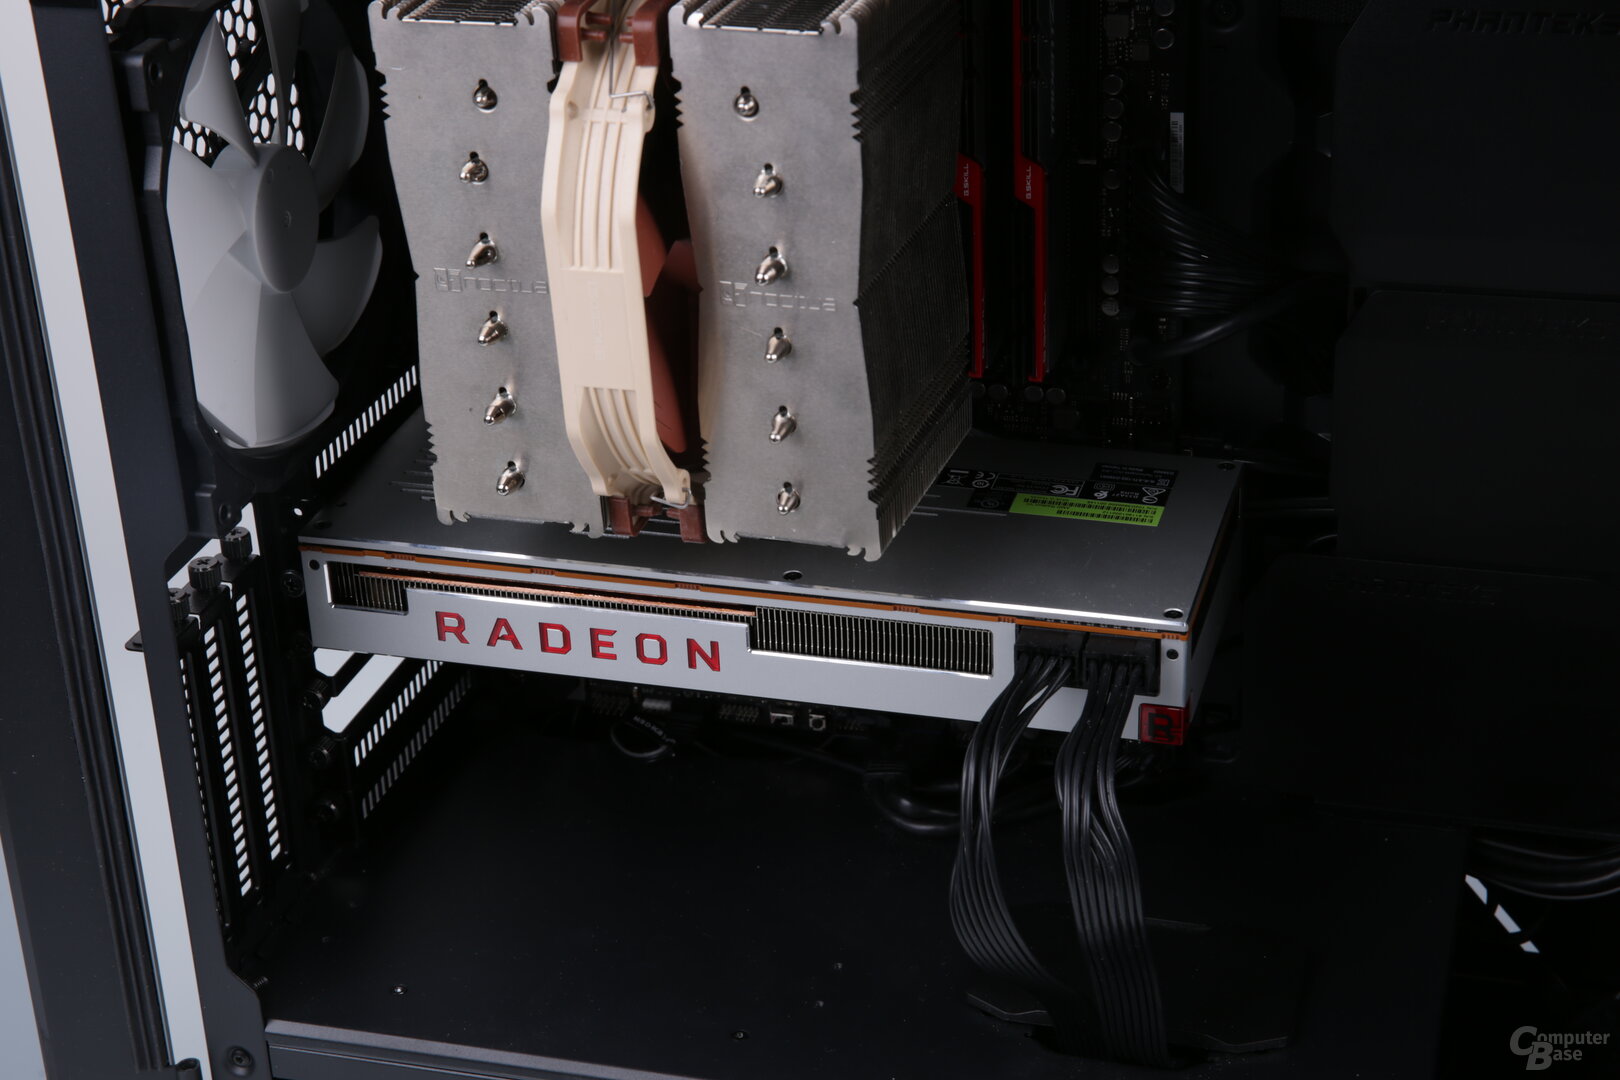 AMD Radeon graphics cards in the test